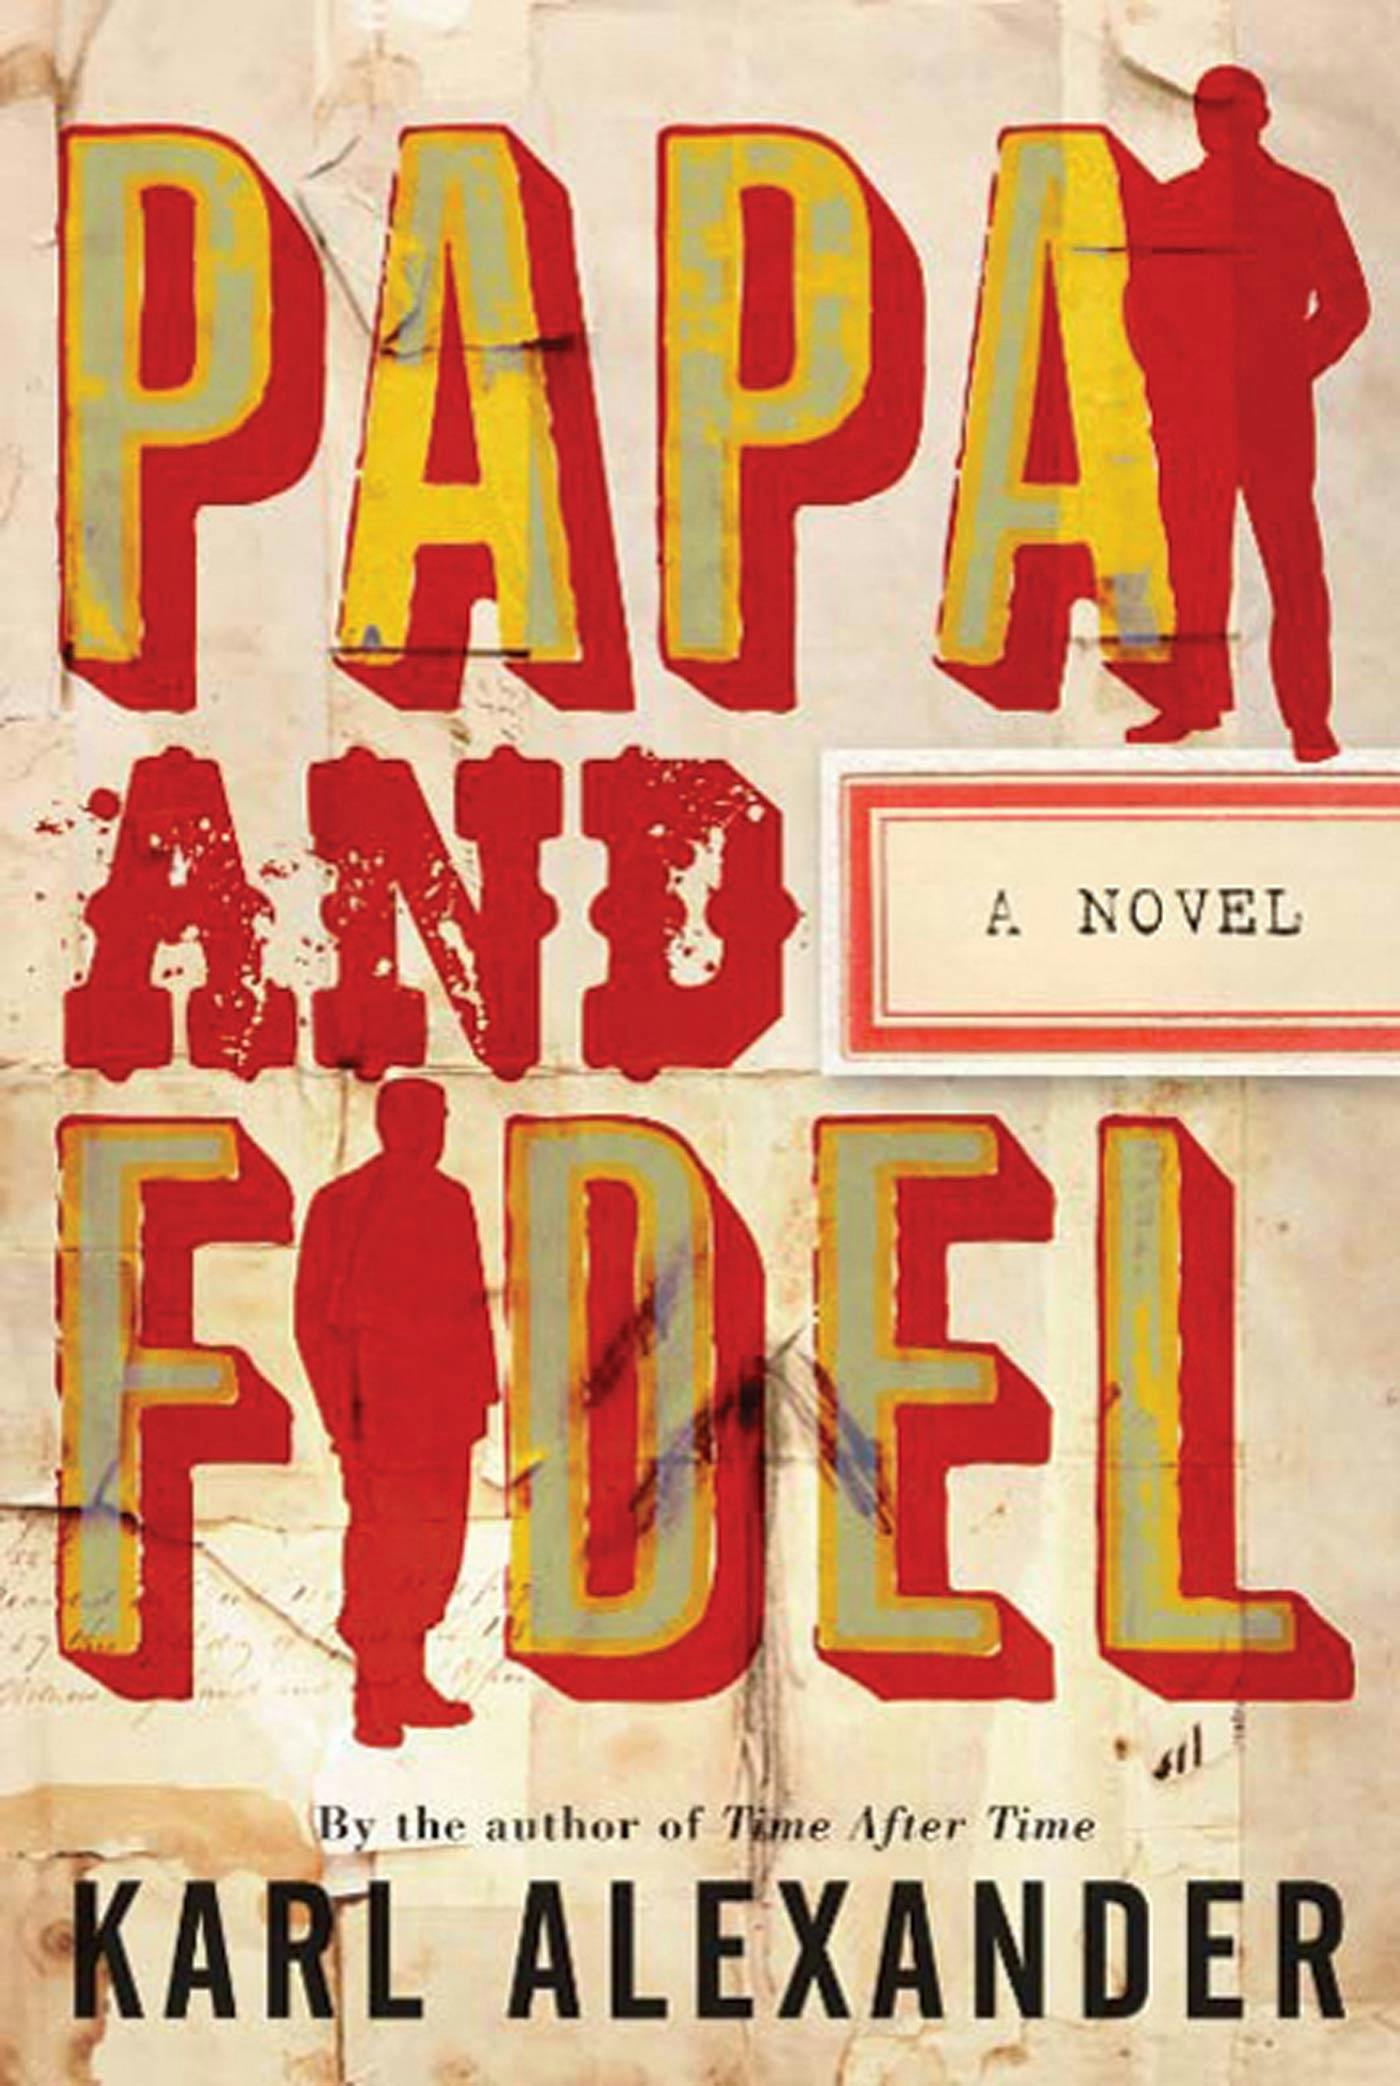 Cover for the book titled as: Papa and Fidel